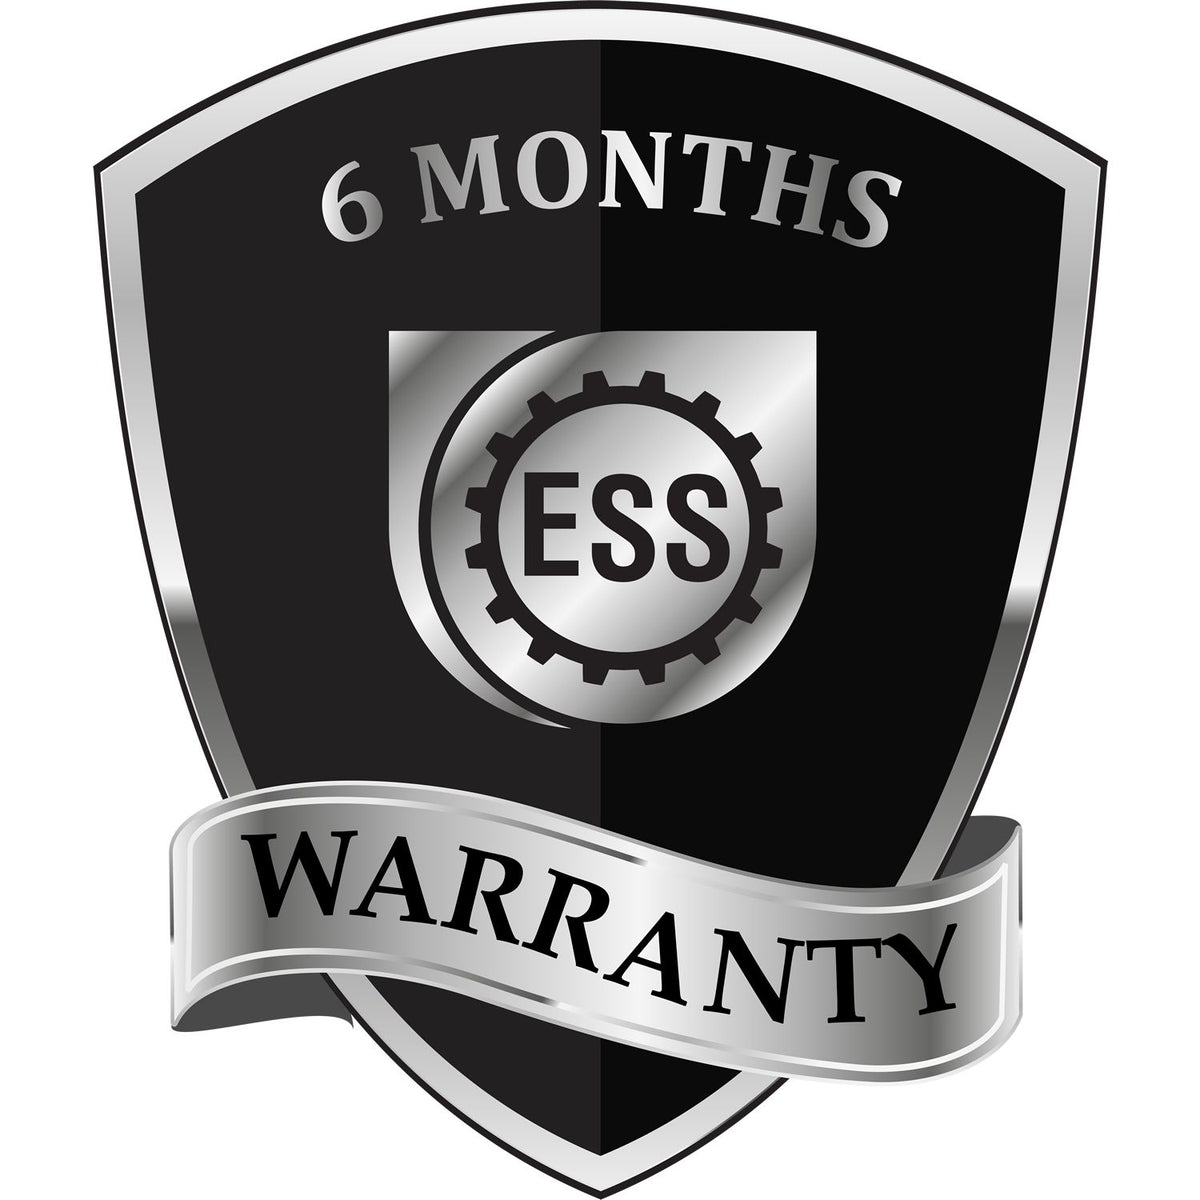 A badge or emblem showing a warranty icon for the Arizona Professional Engineer Seal Stamp